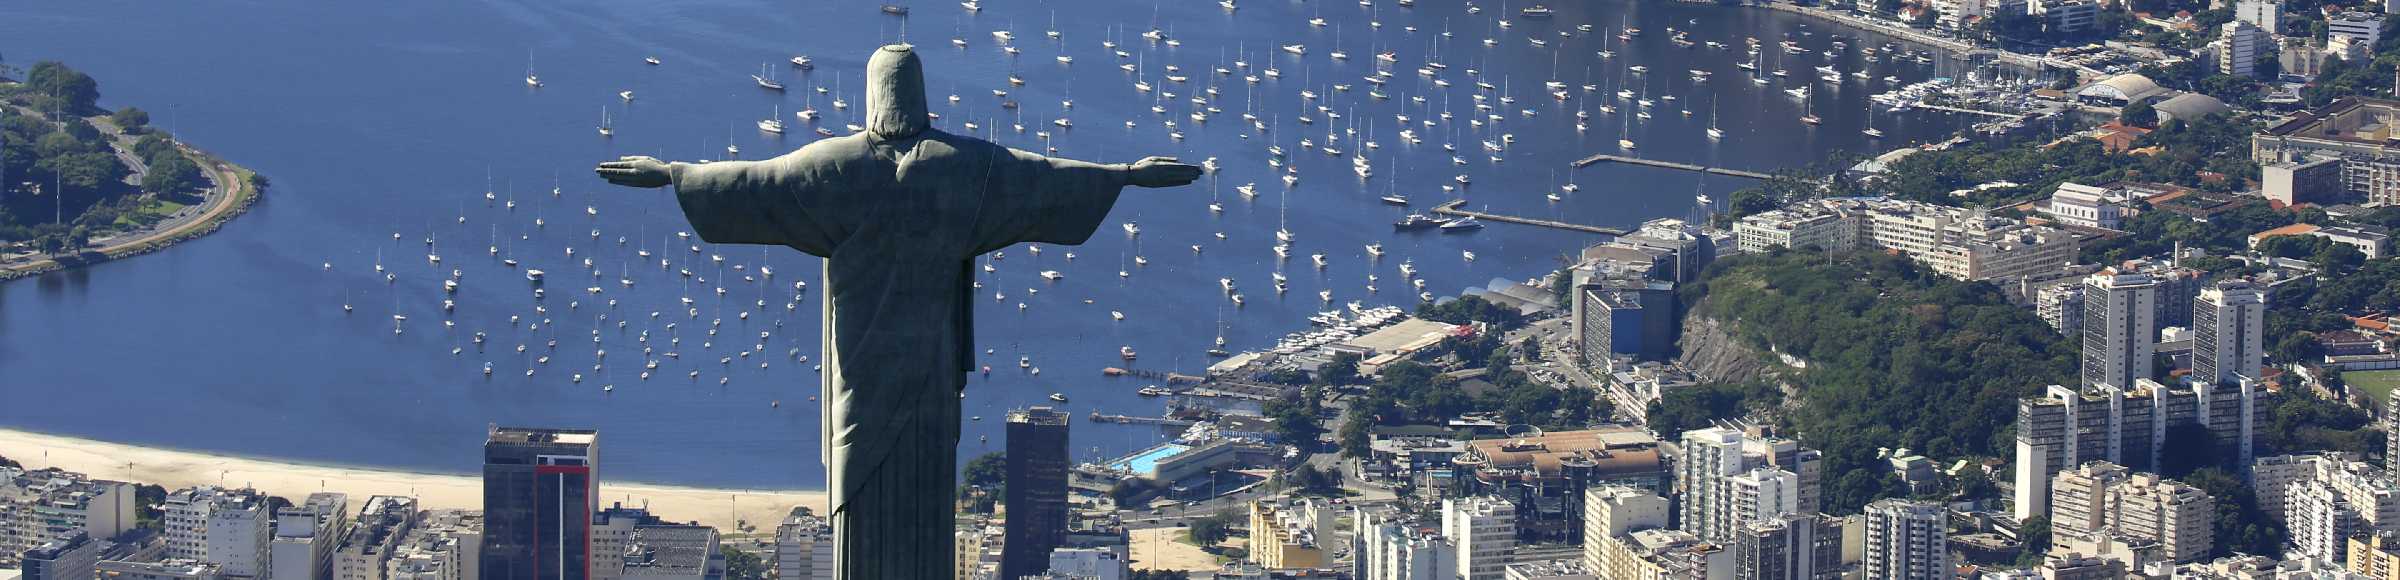 Statue of Christ the Redeemer on Corcovado Mountain in the Tijuca forest in Rio de Janeiro in Brazil